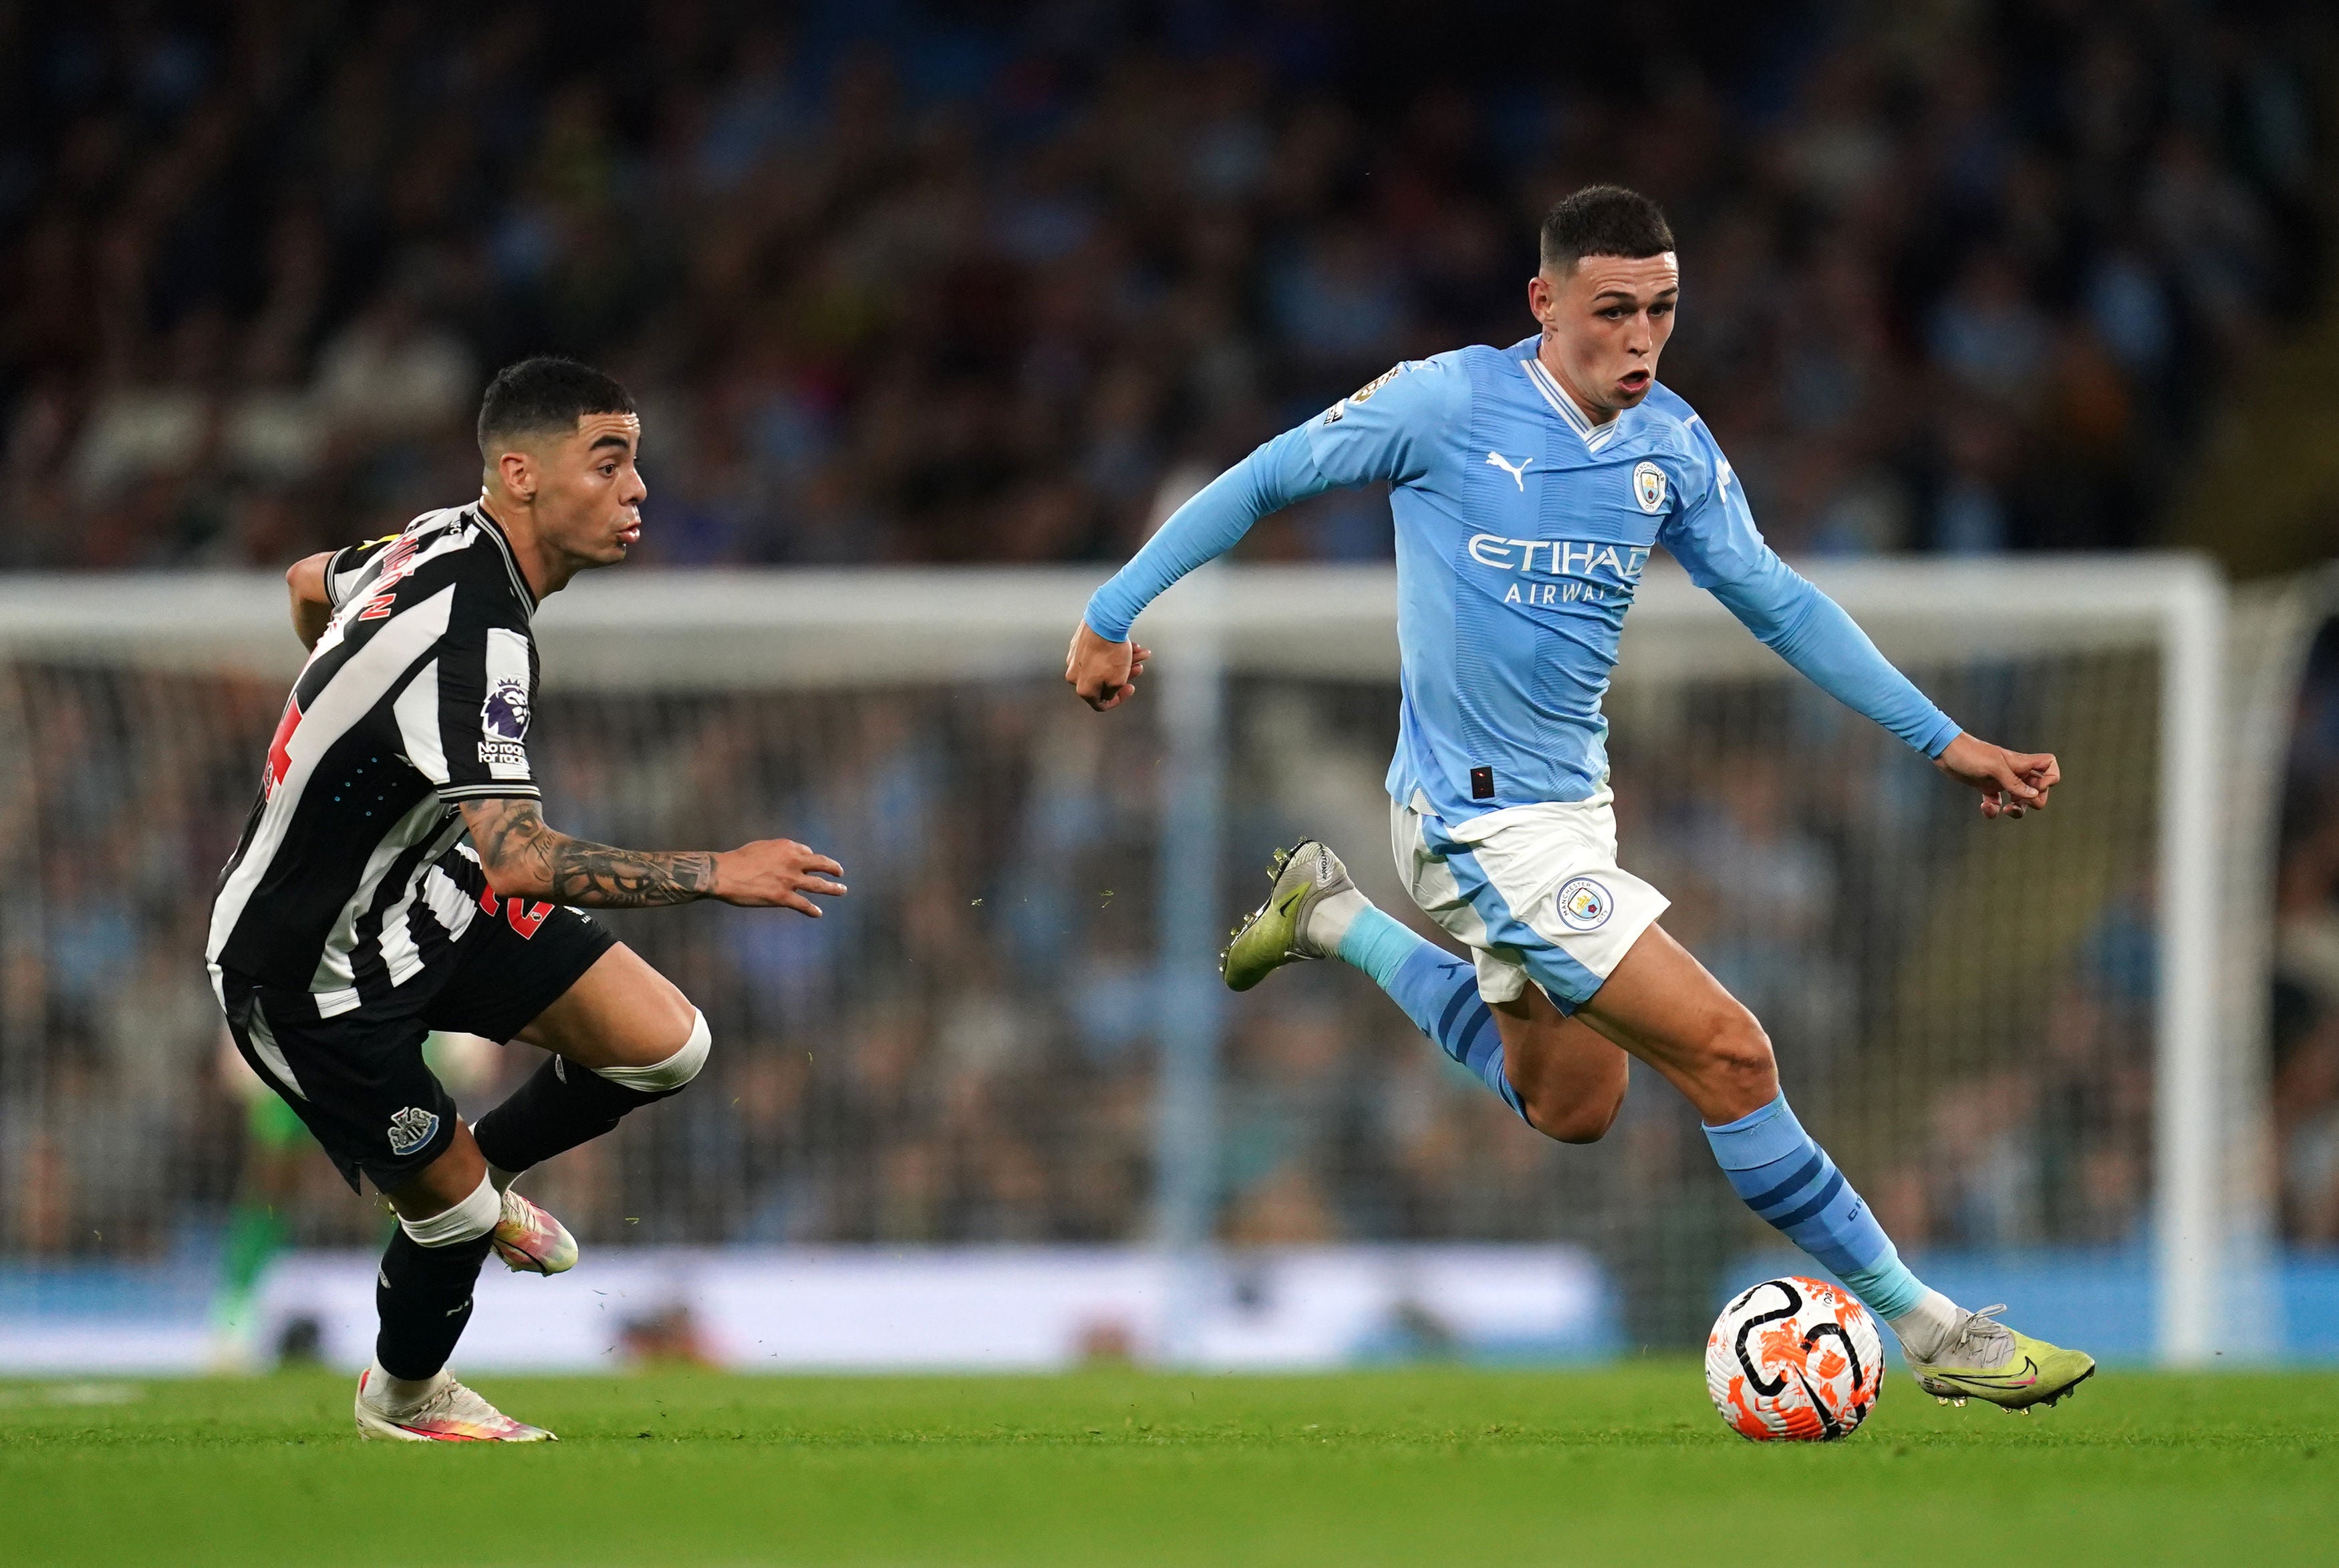 Phil Foden could take another step up this season